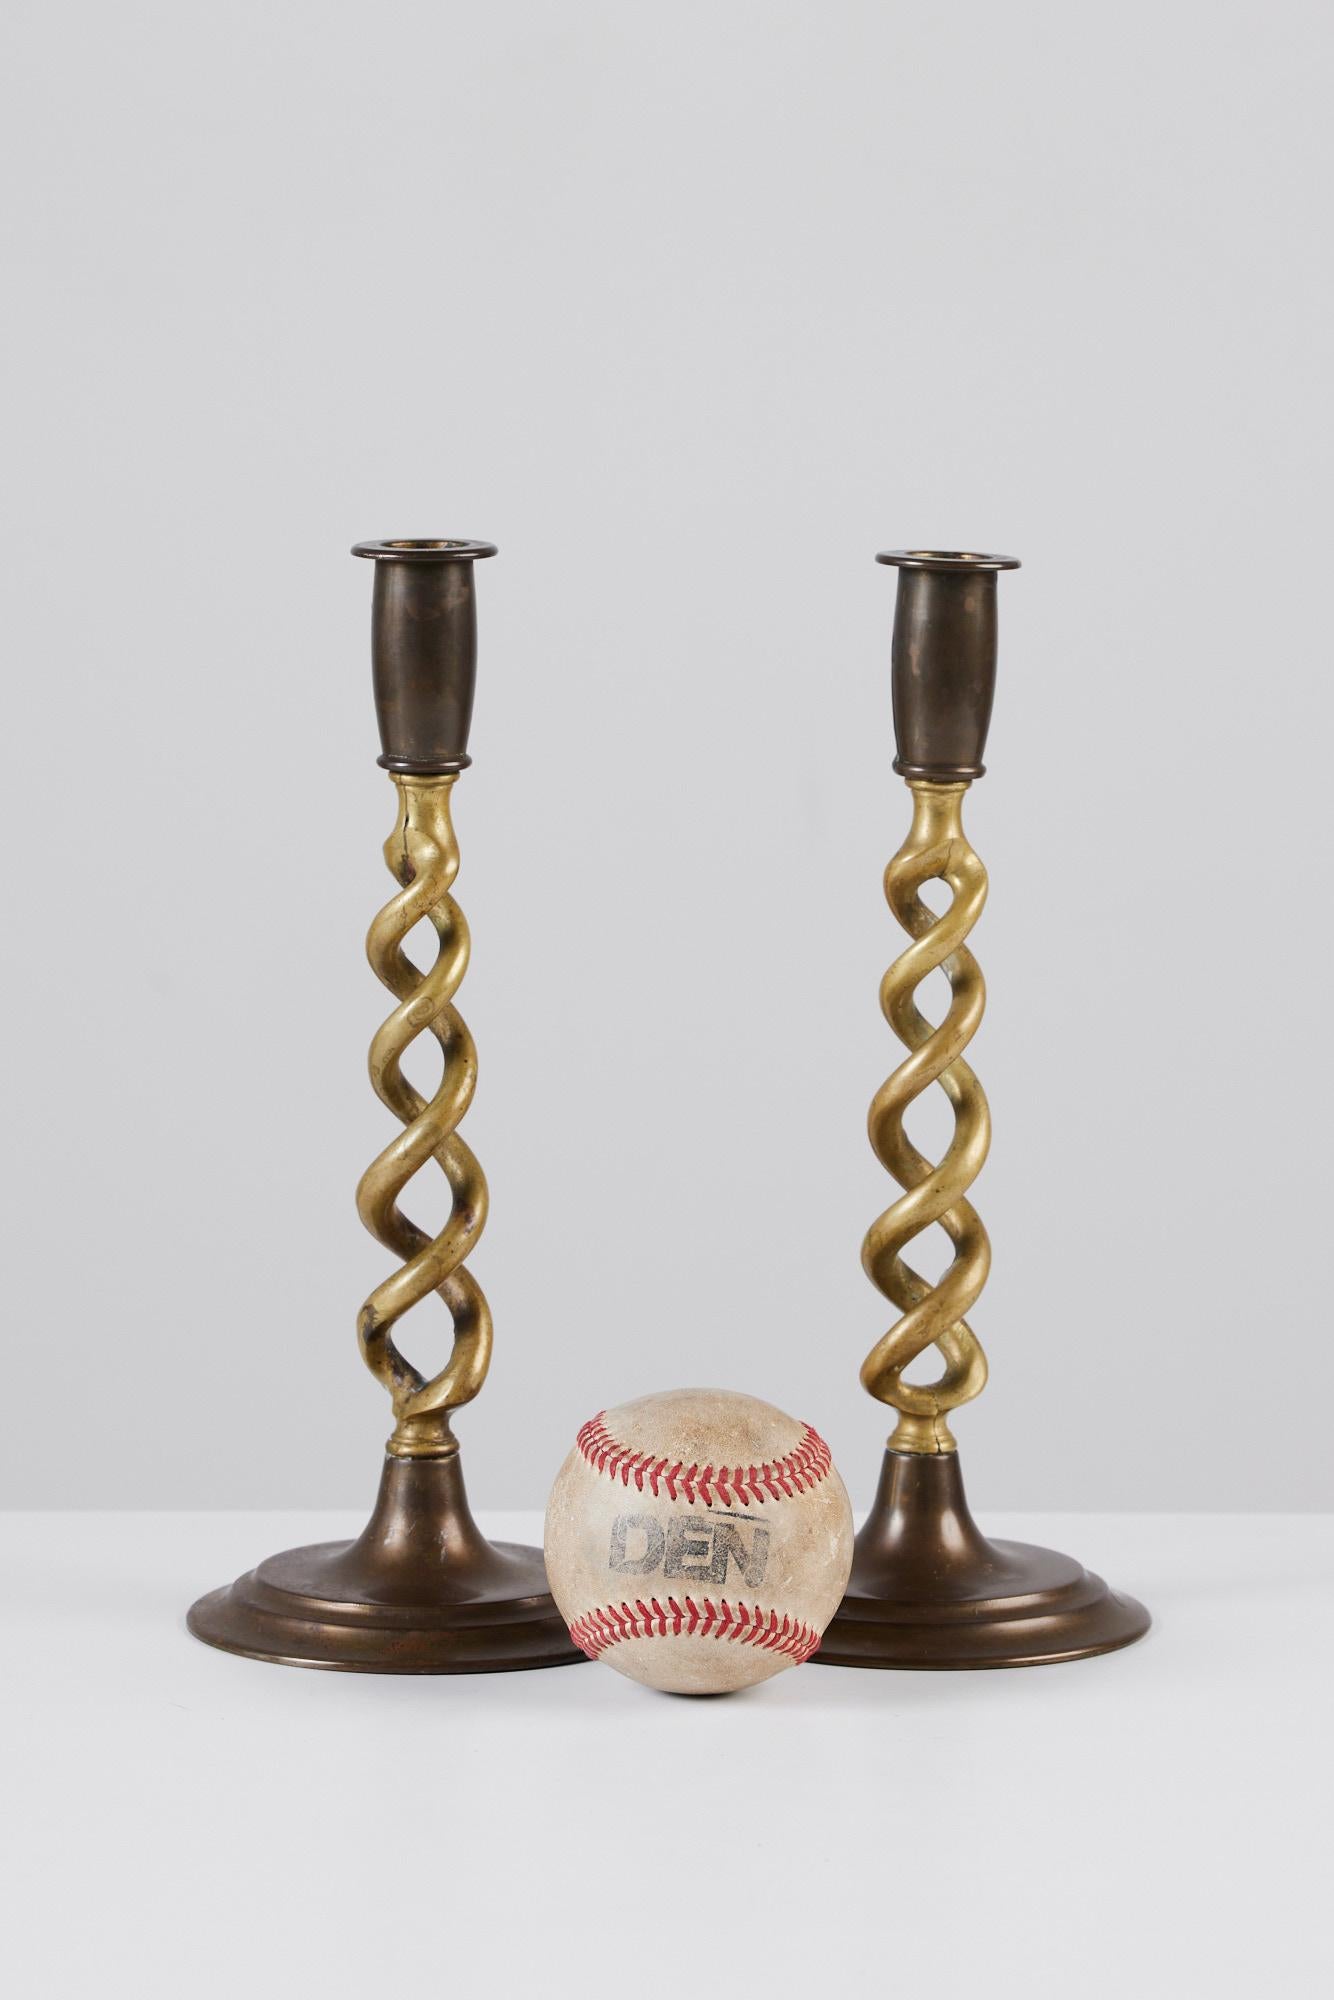 Pair of solid brass candlesticks, by Peerage, c.1920s, England. The pair of beautifully patinated candlesticks feature barley twist stems, round tiered bases.

Marked - Peerage England on the underside

Dimensions: 4” diameter x 10” height; stem